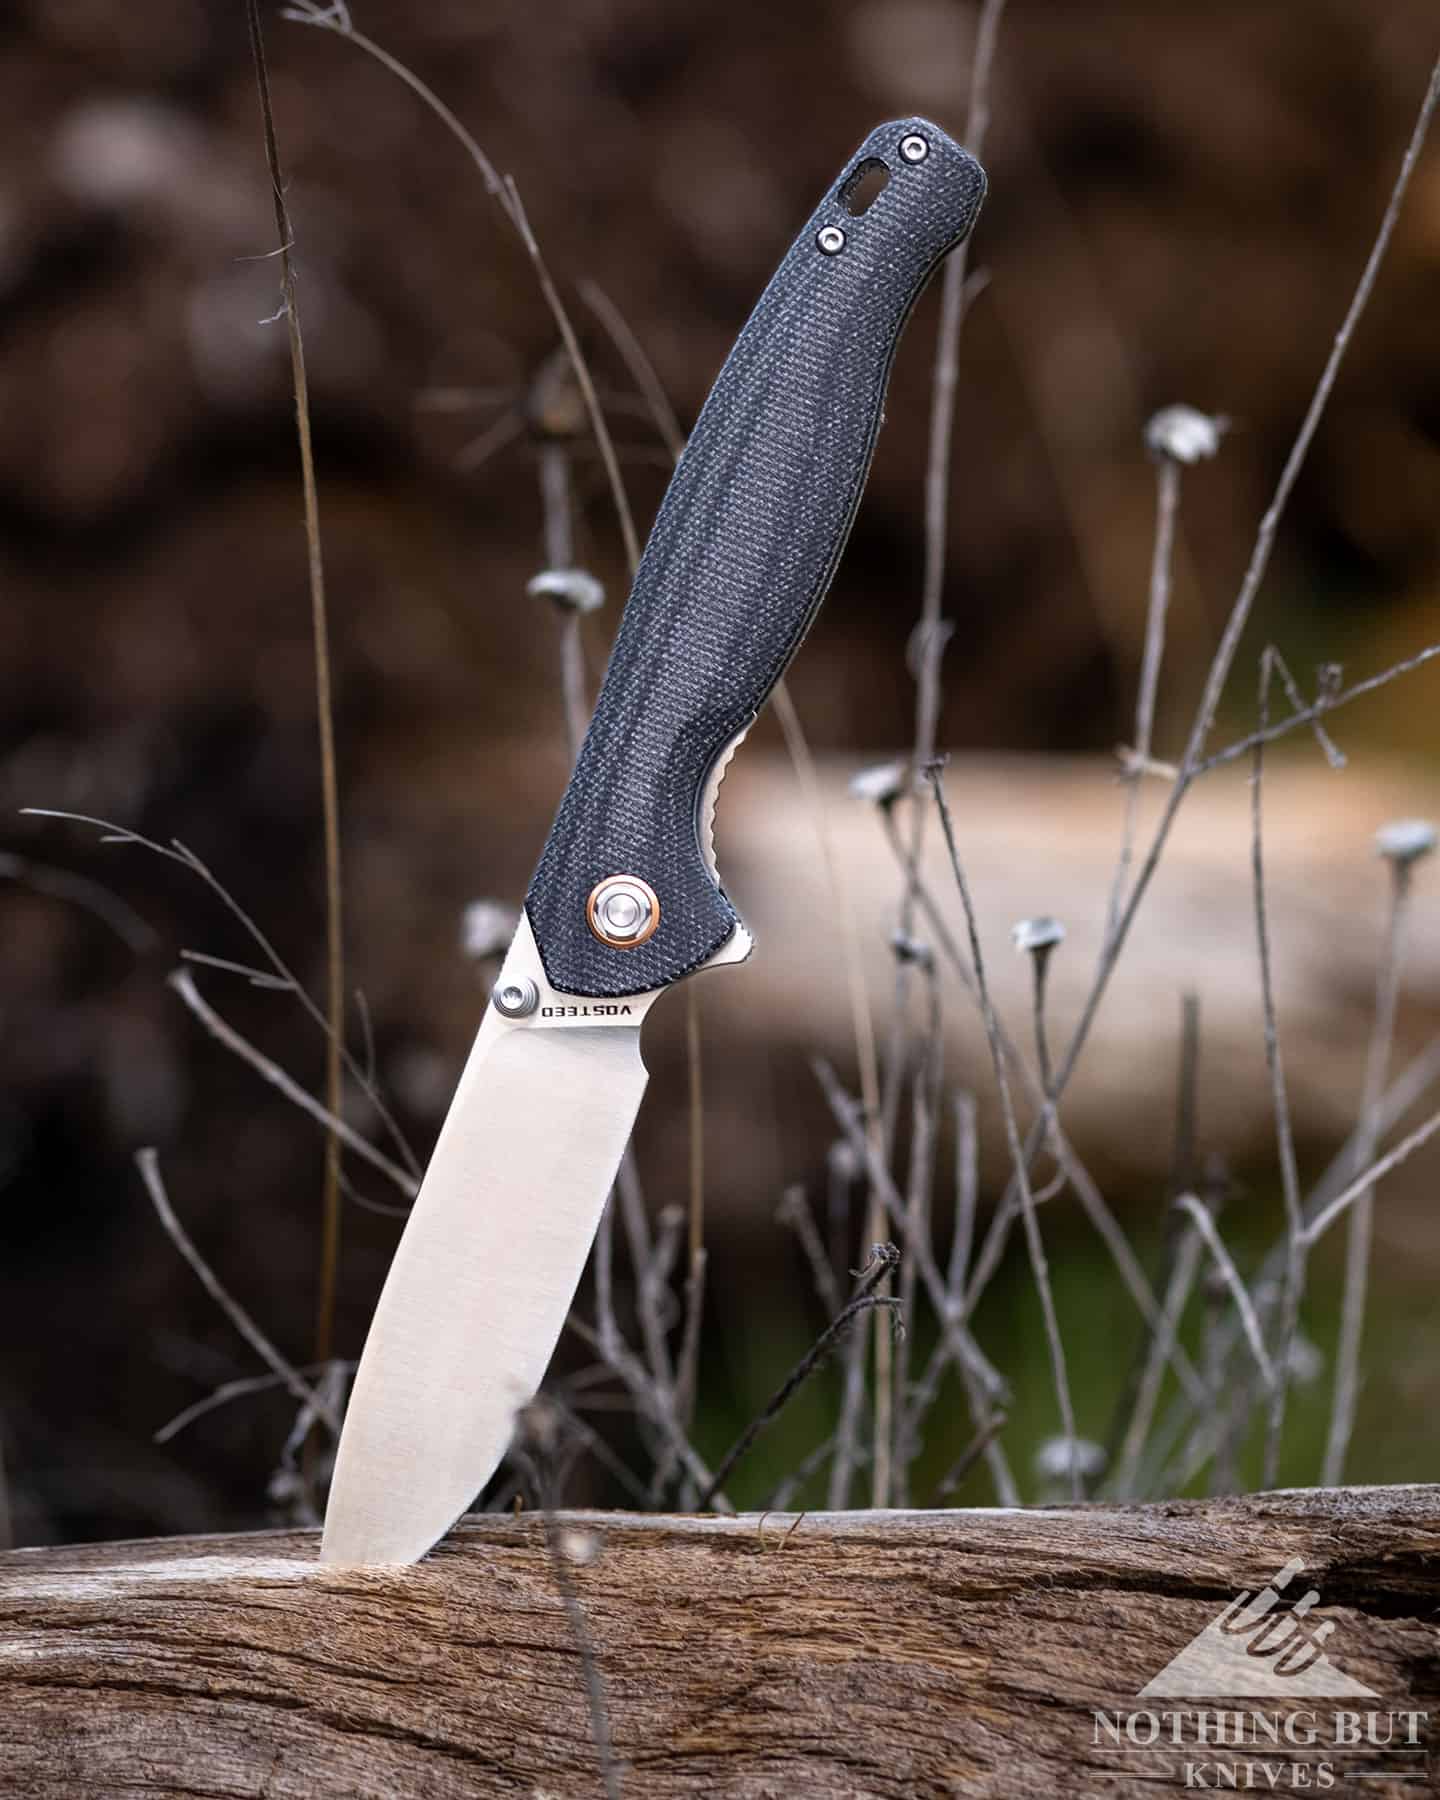 The Vosteed Labrador is a big pocket knife that that makes an ideal camping or hunting buddy.